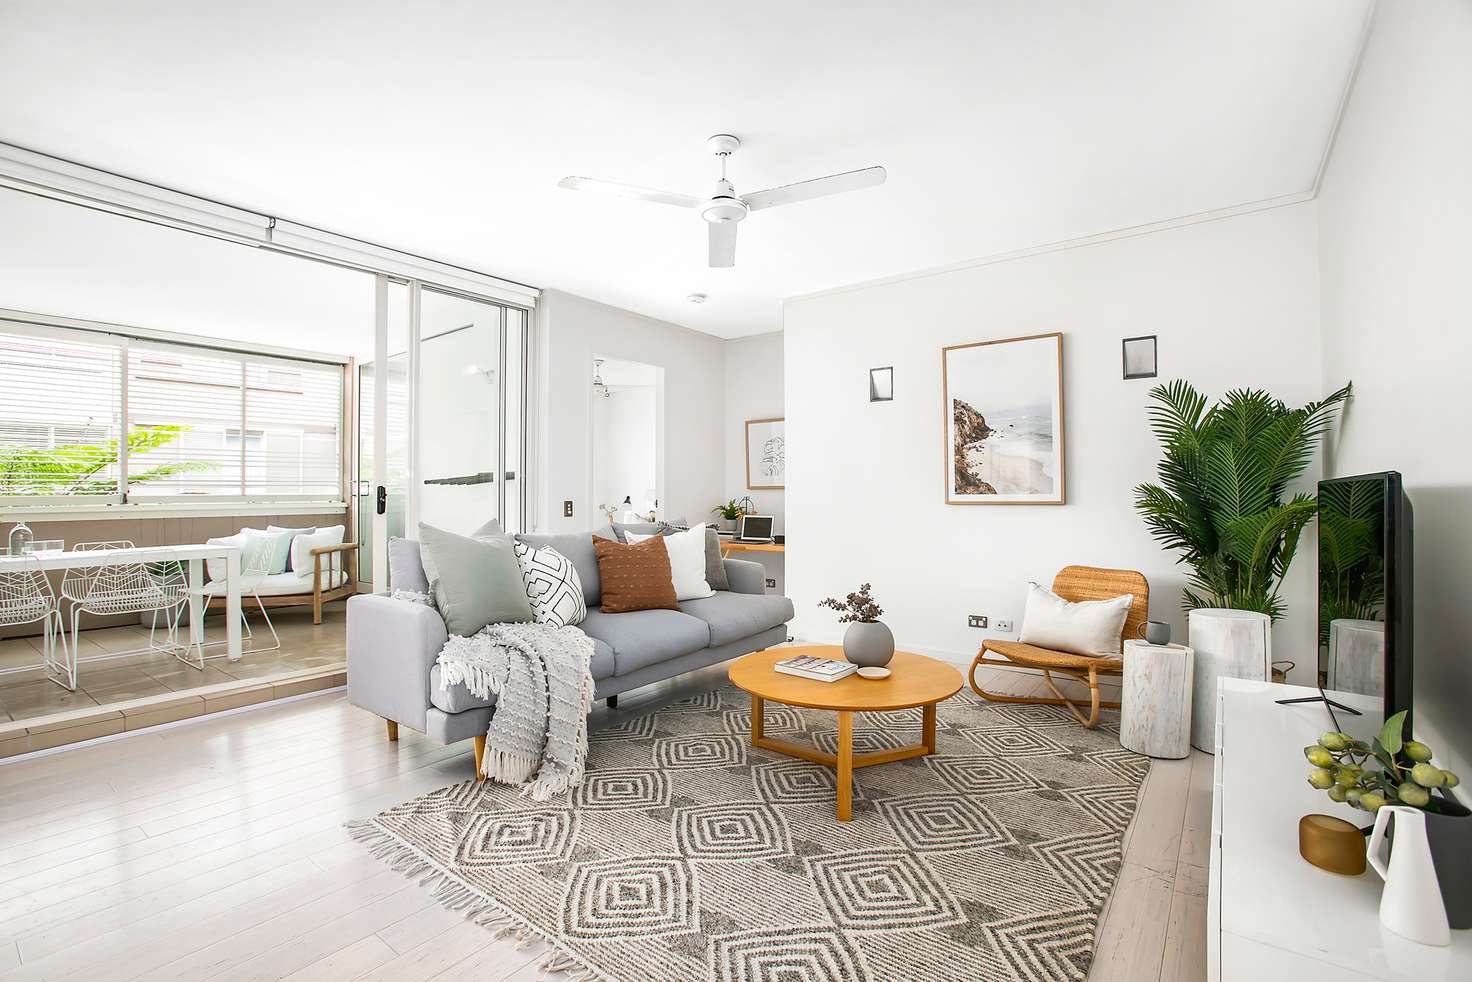 Main view of Homely apartment listing, 203/10 Jaques Avenue, Bondi Beach NSW 2026